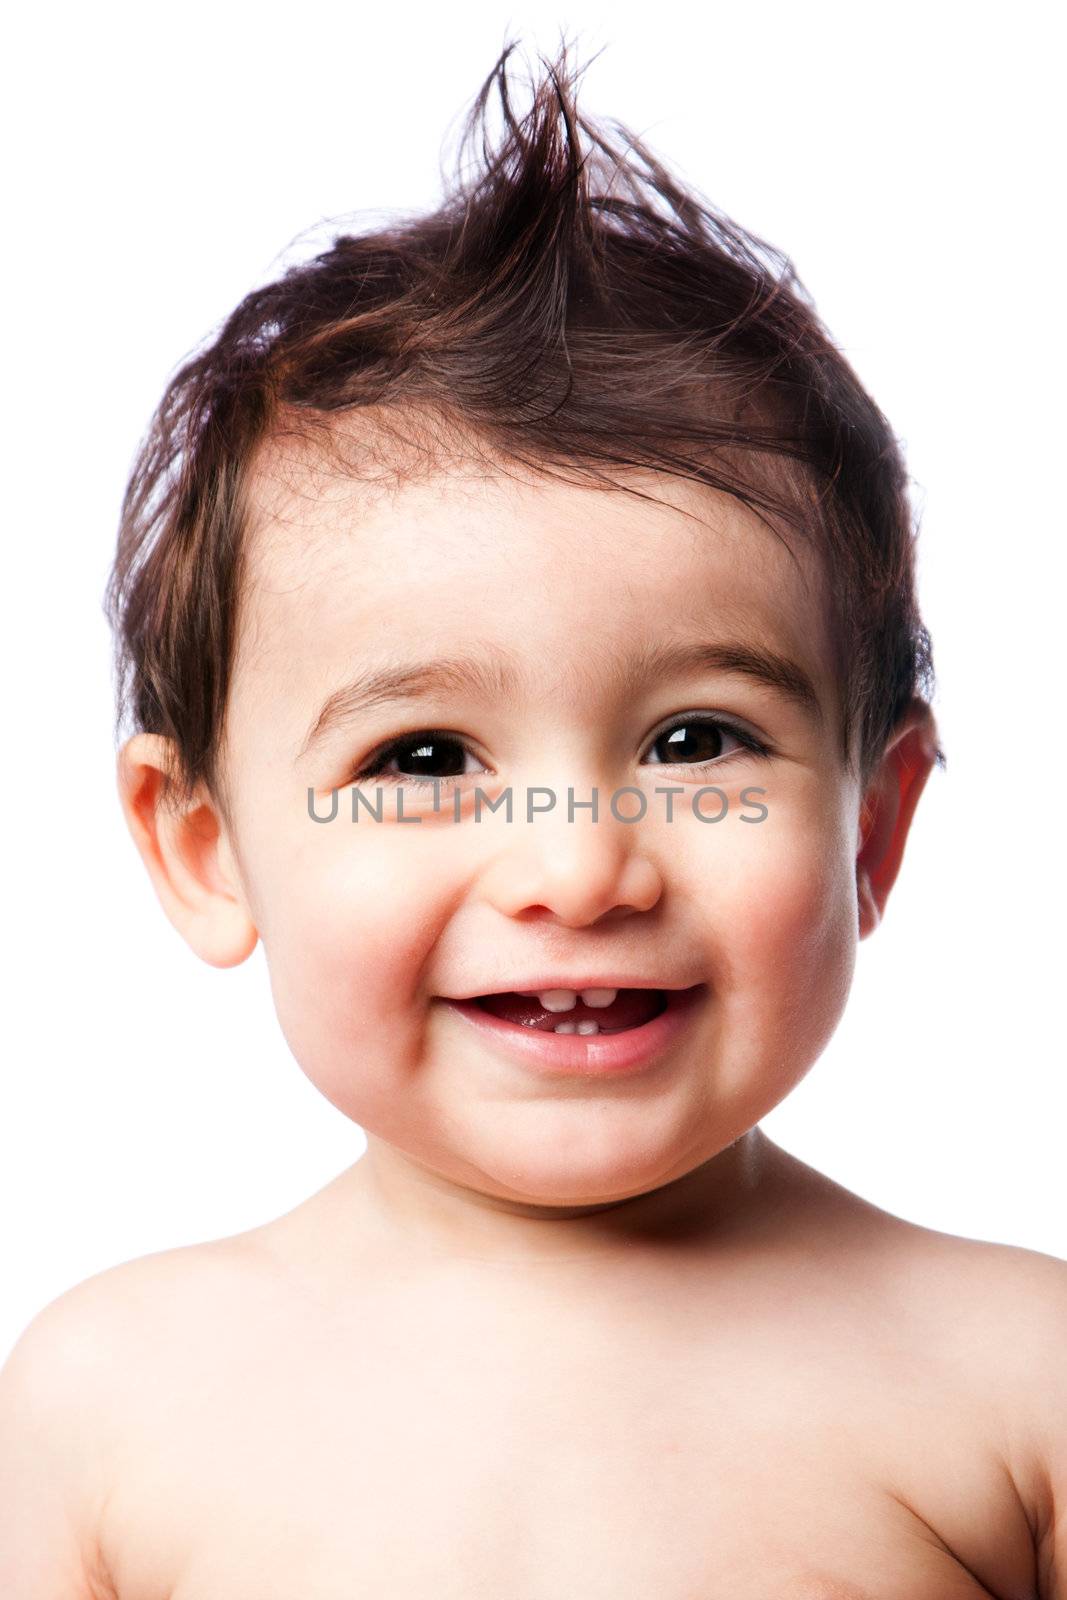 Cute happy smiling teething baby toddler with mohawk hairstyle, isolated.